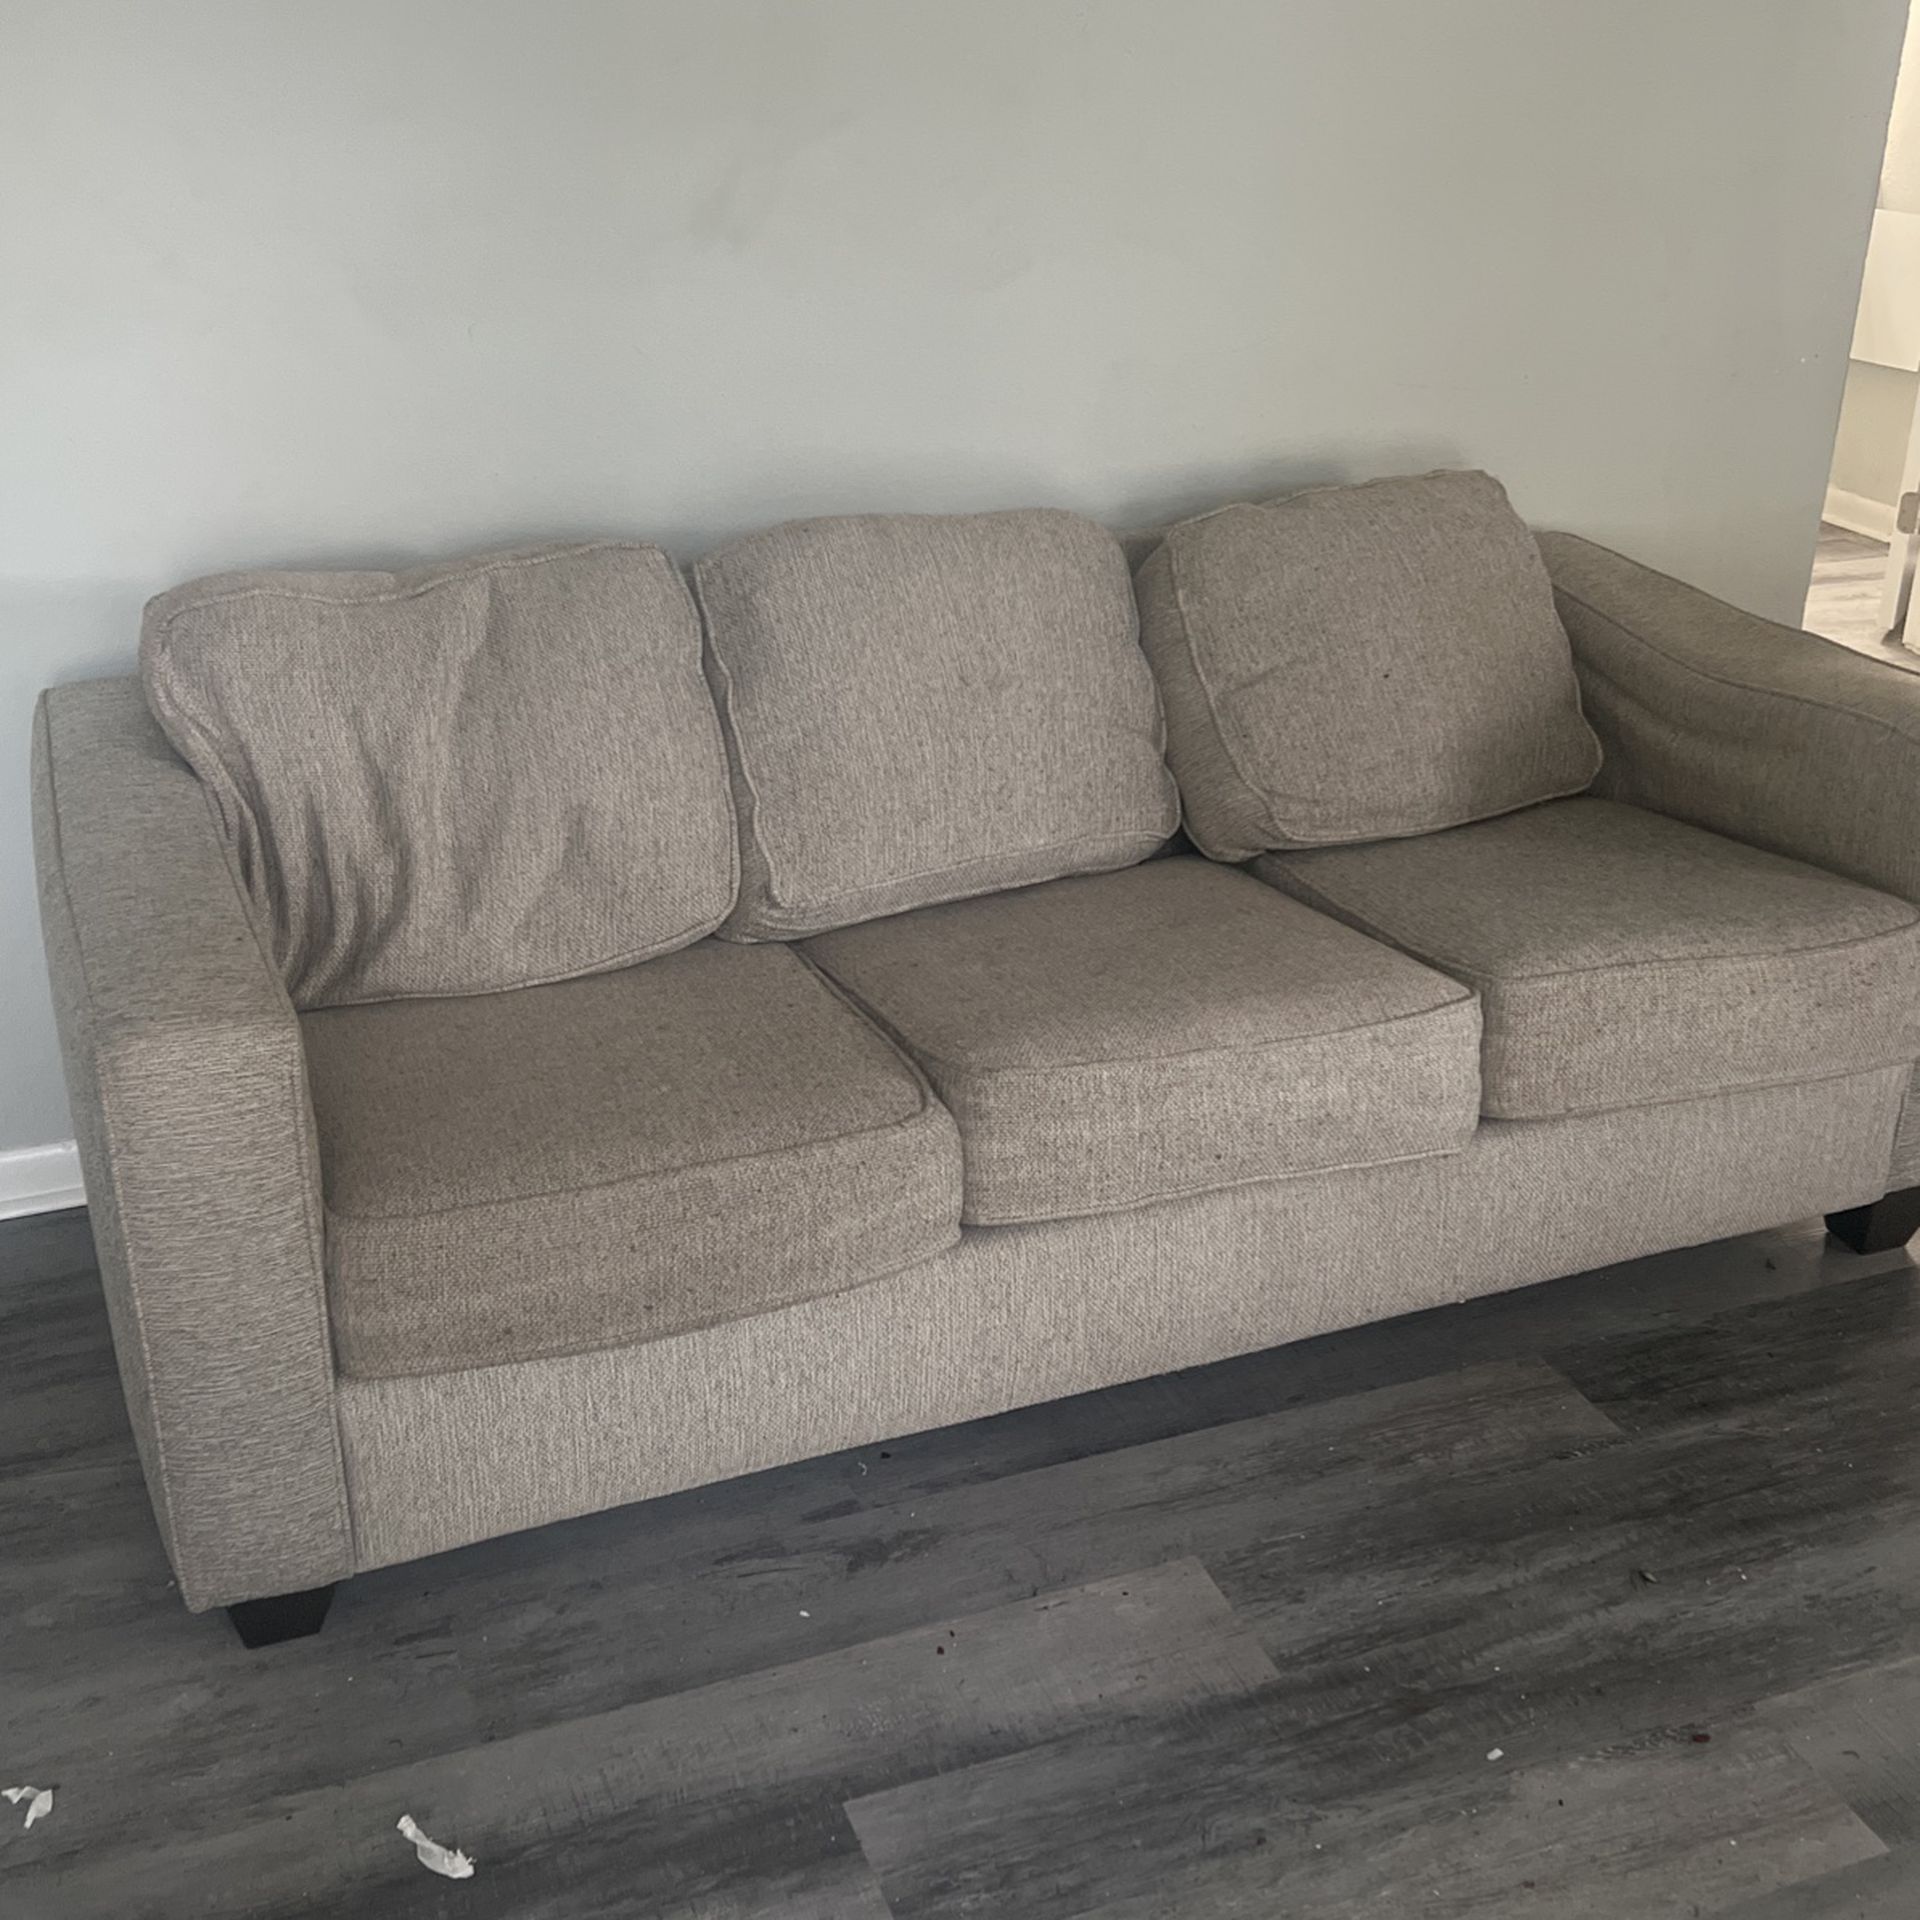 Three Seater Beige/Tan Couch 